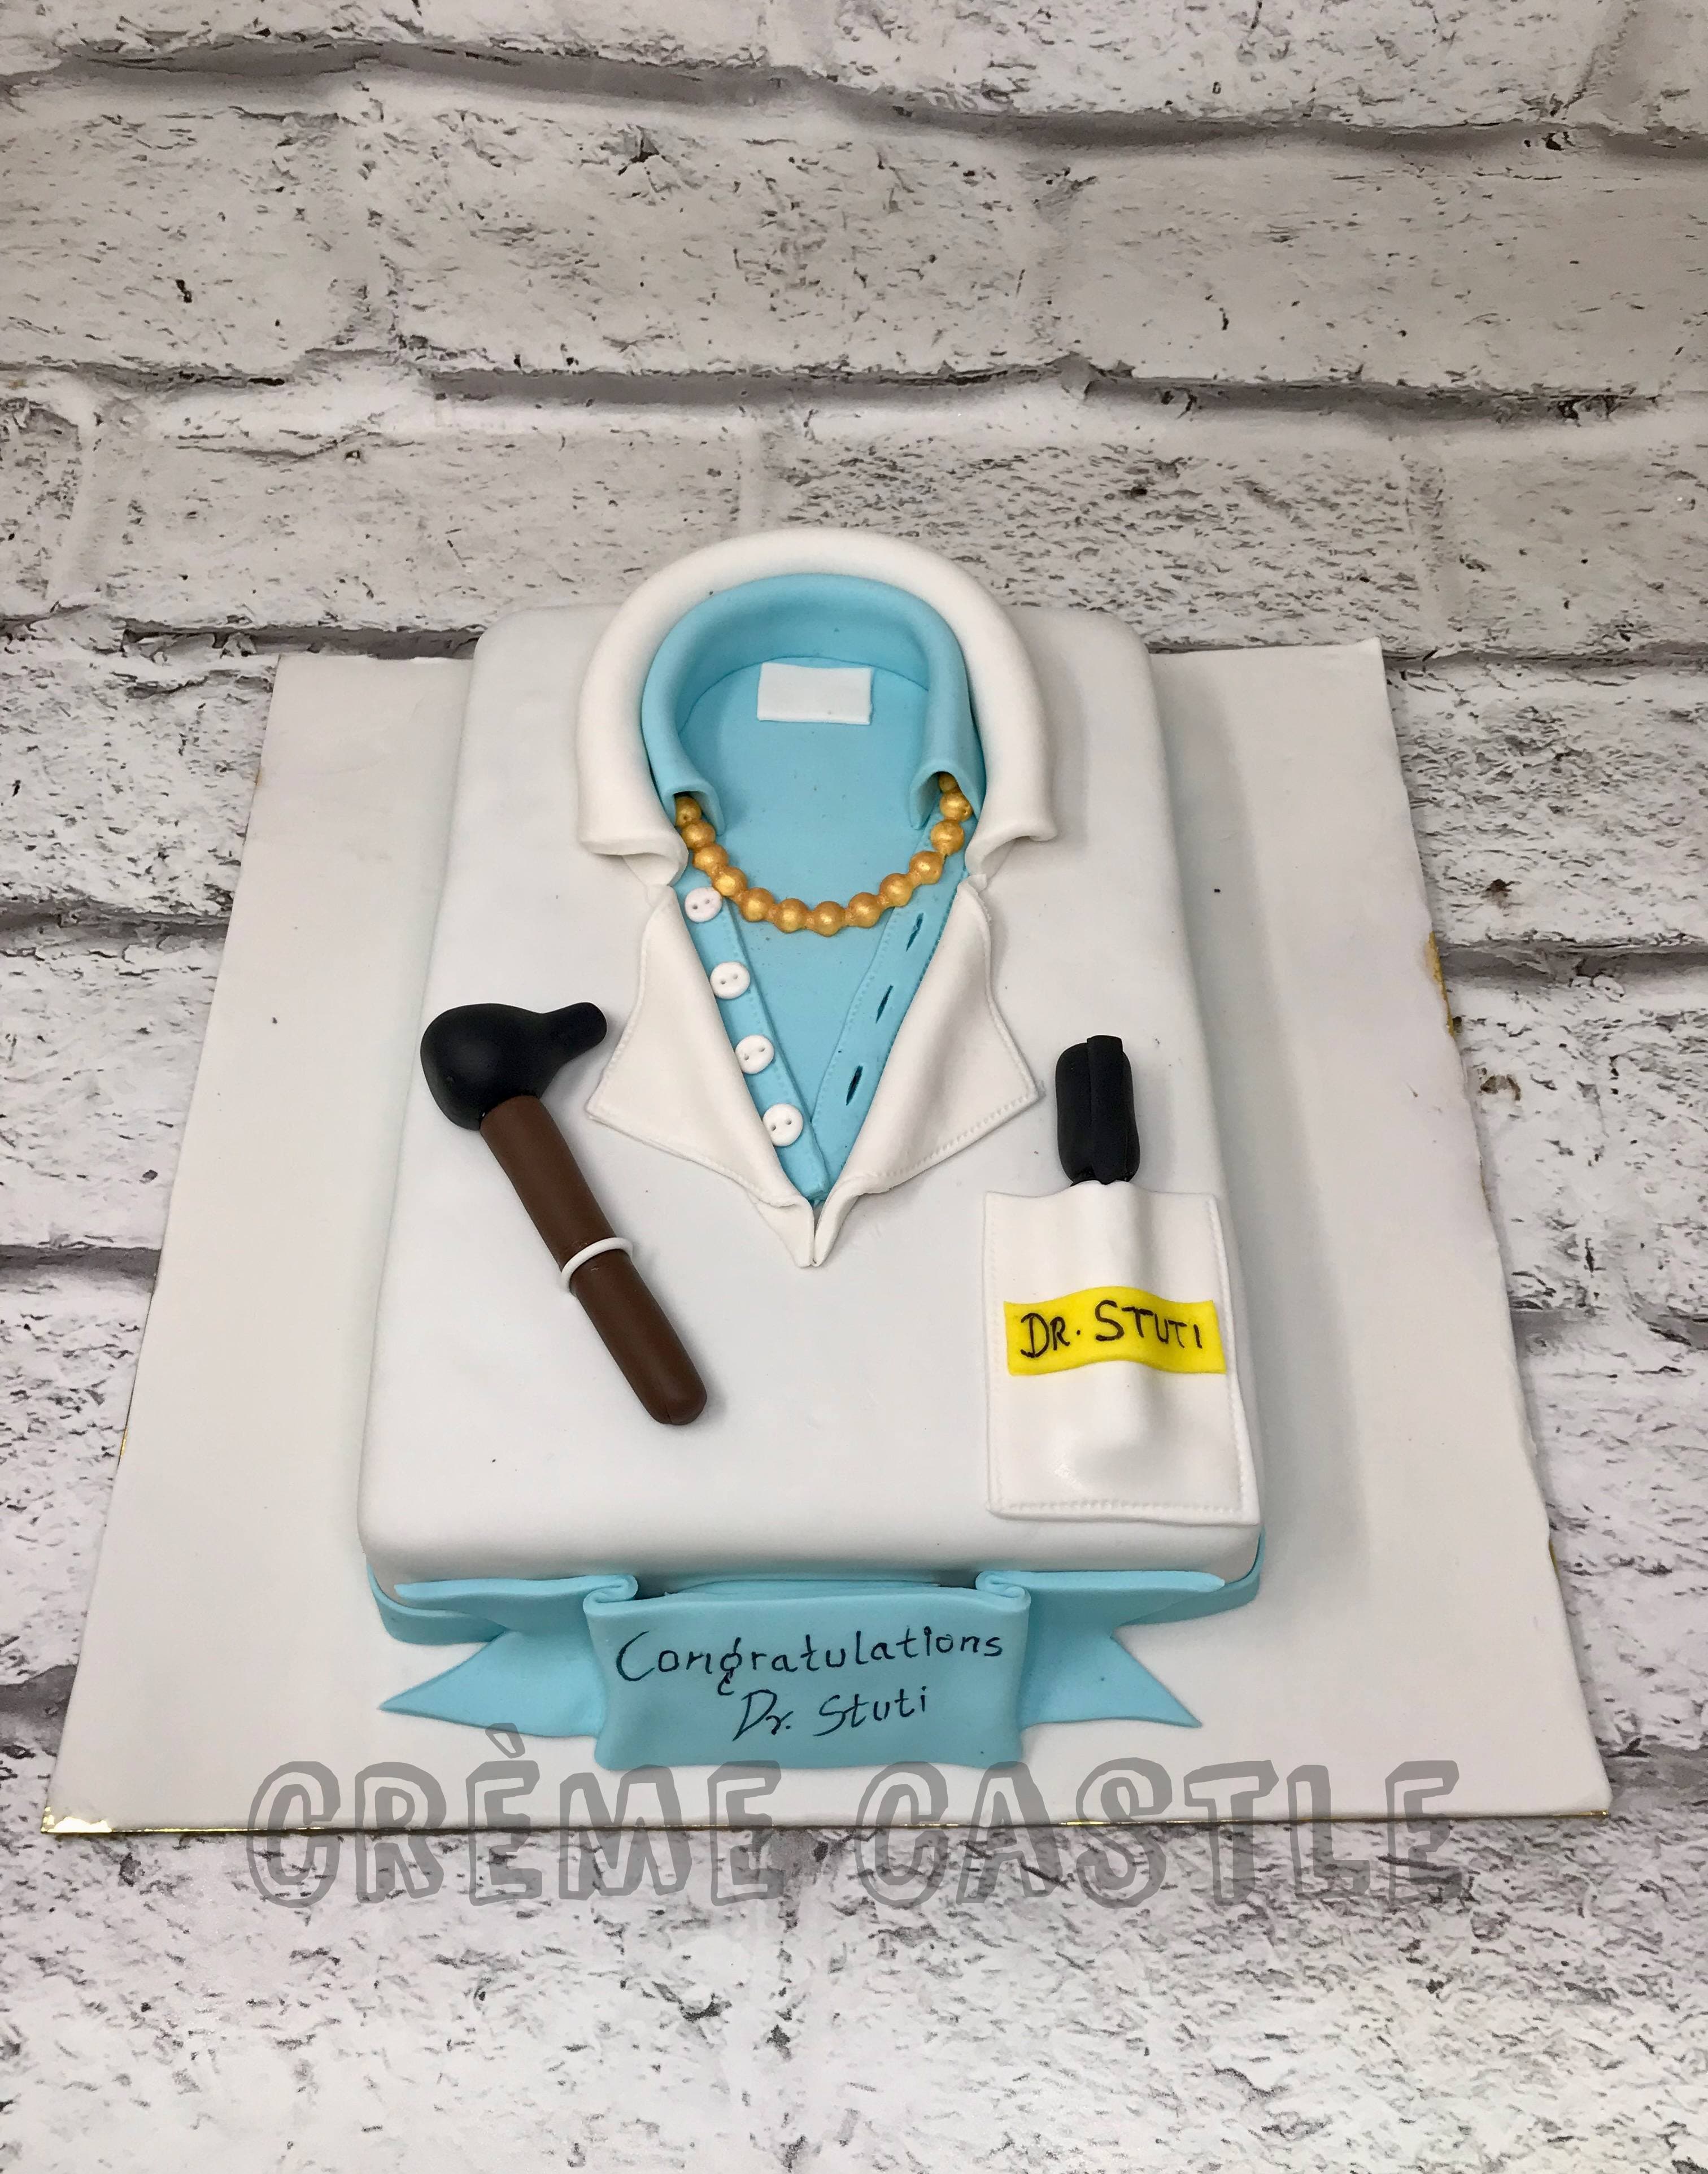 Elegant cake - A classy and elegant cake for a young lady's birthday  celebration